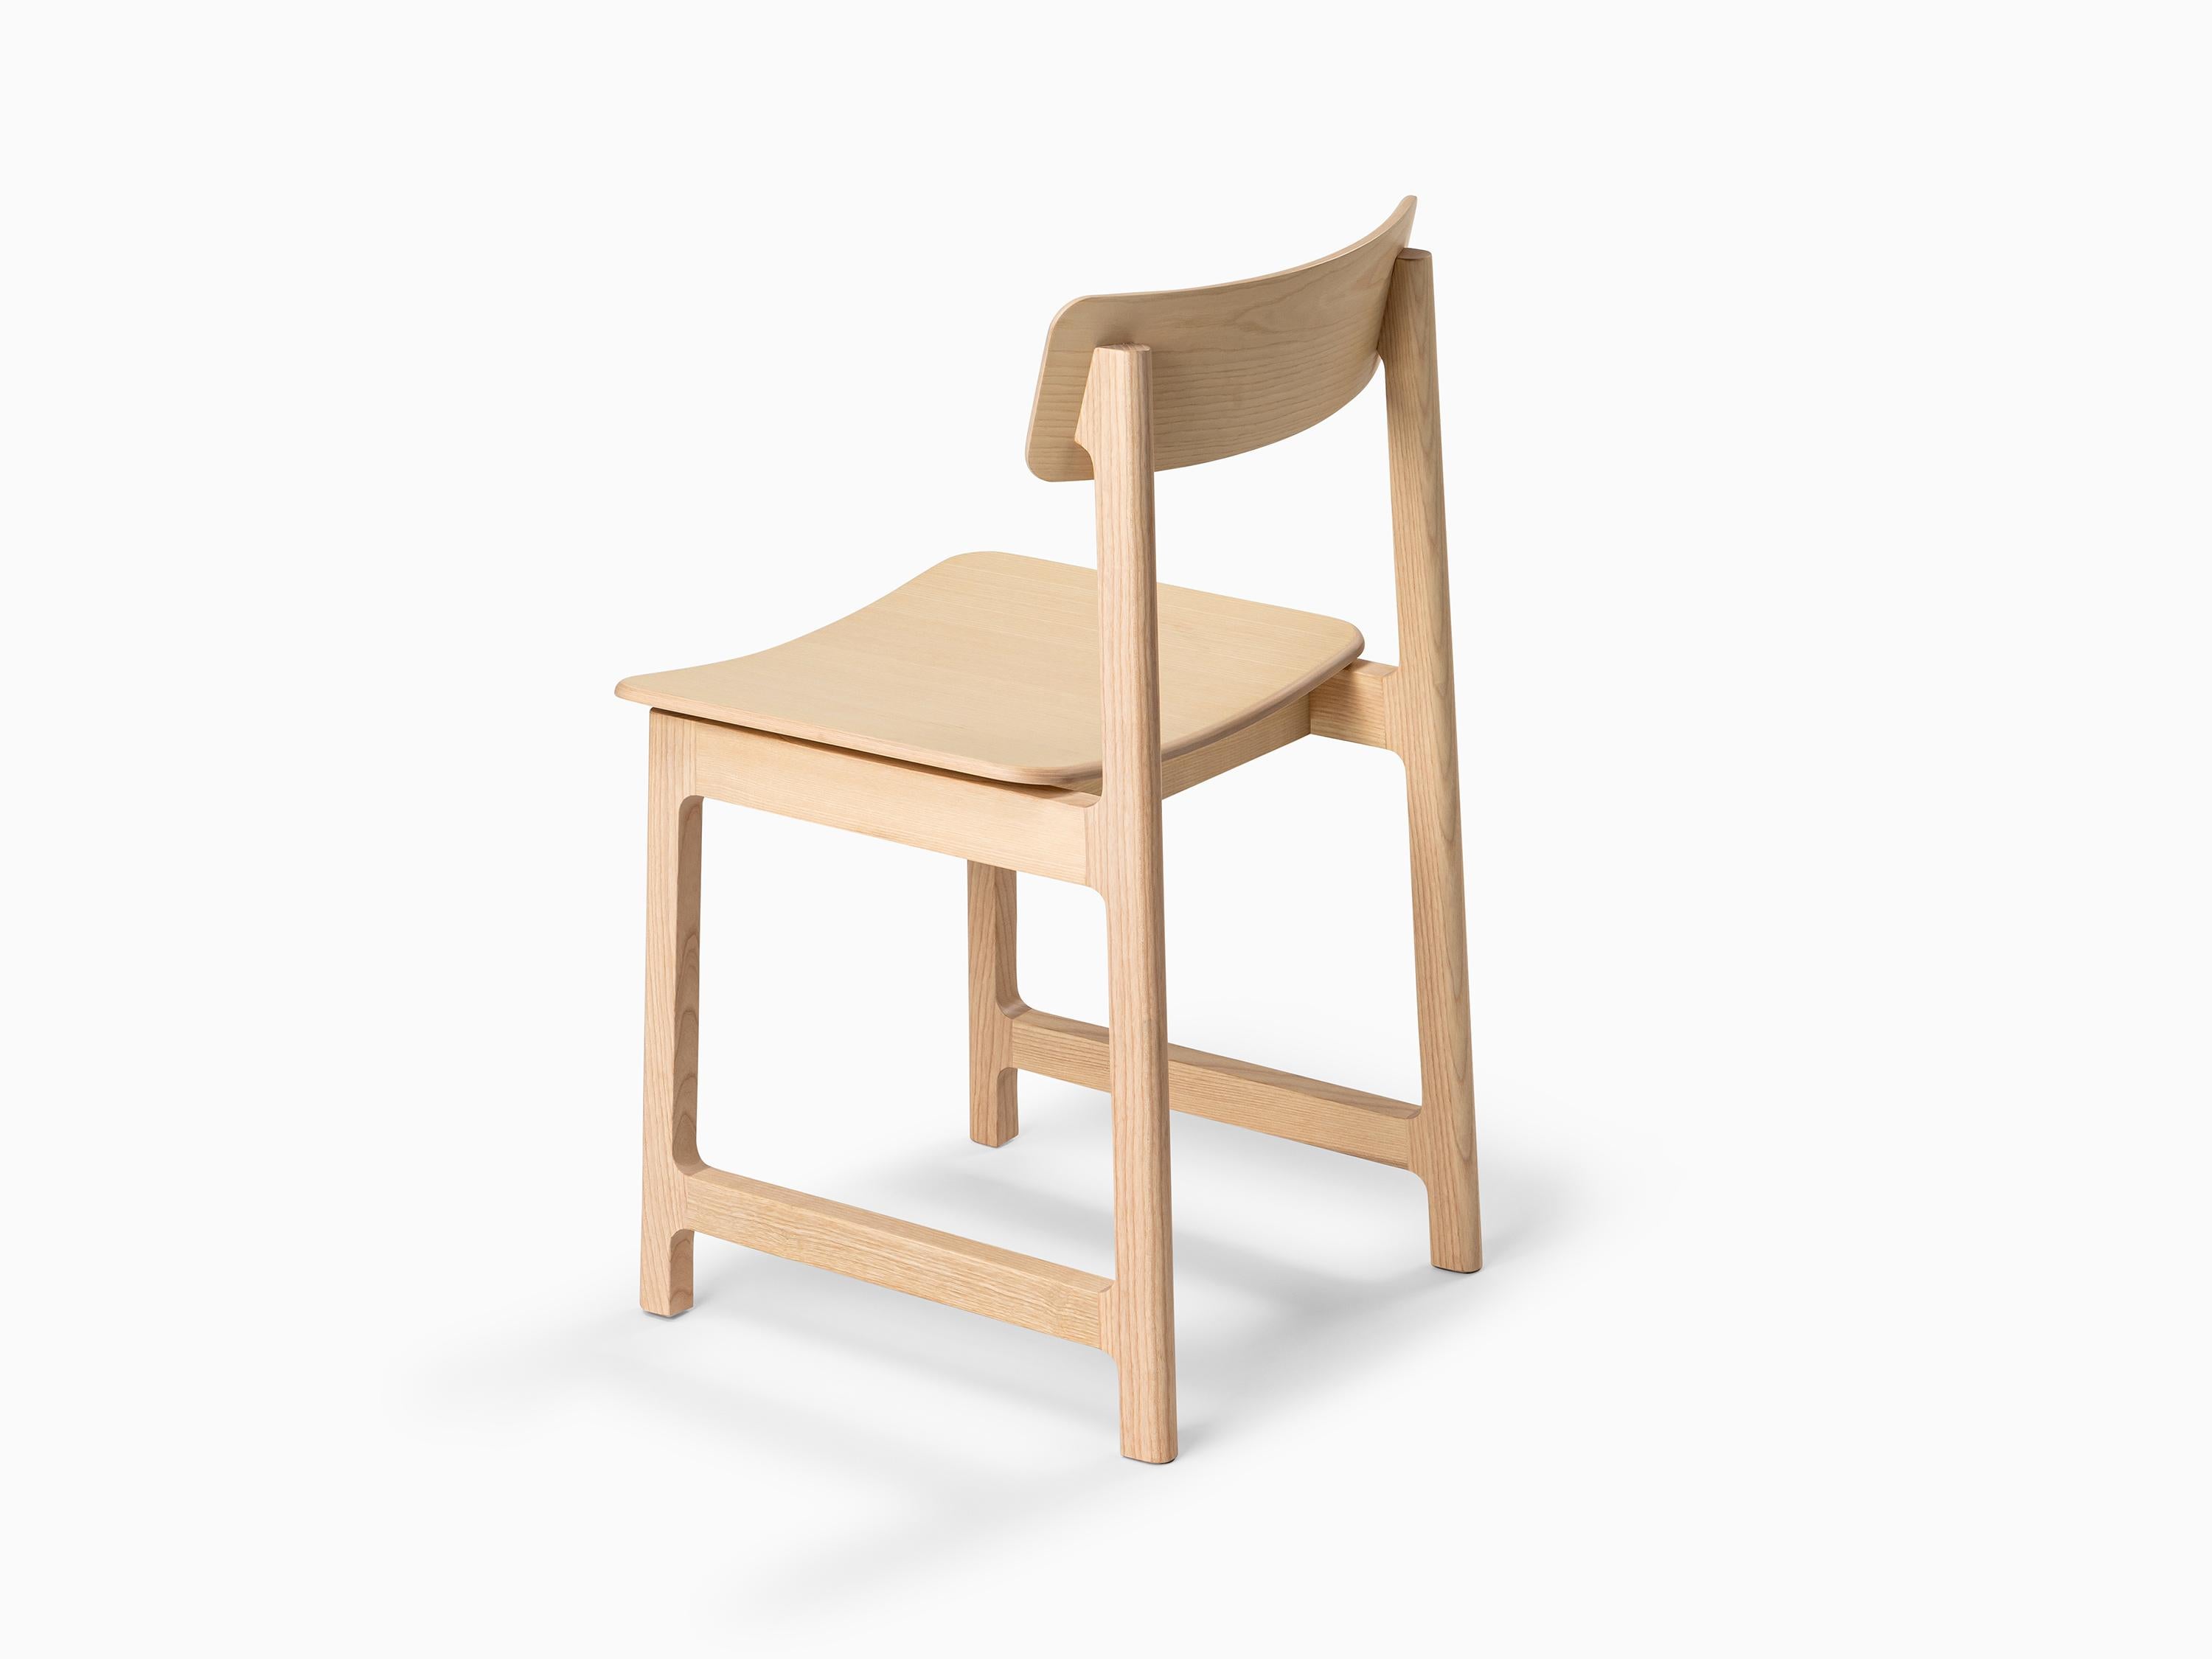 Portuguese Minimalist Modern Chair in Ash Wood FRAME Collection For Sale